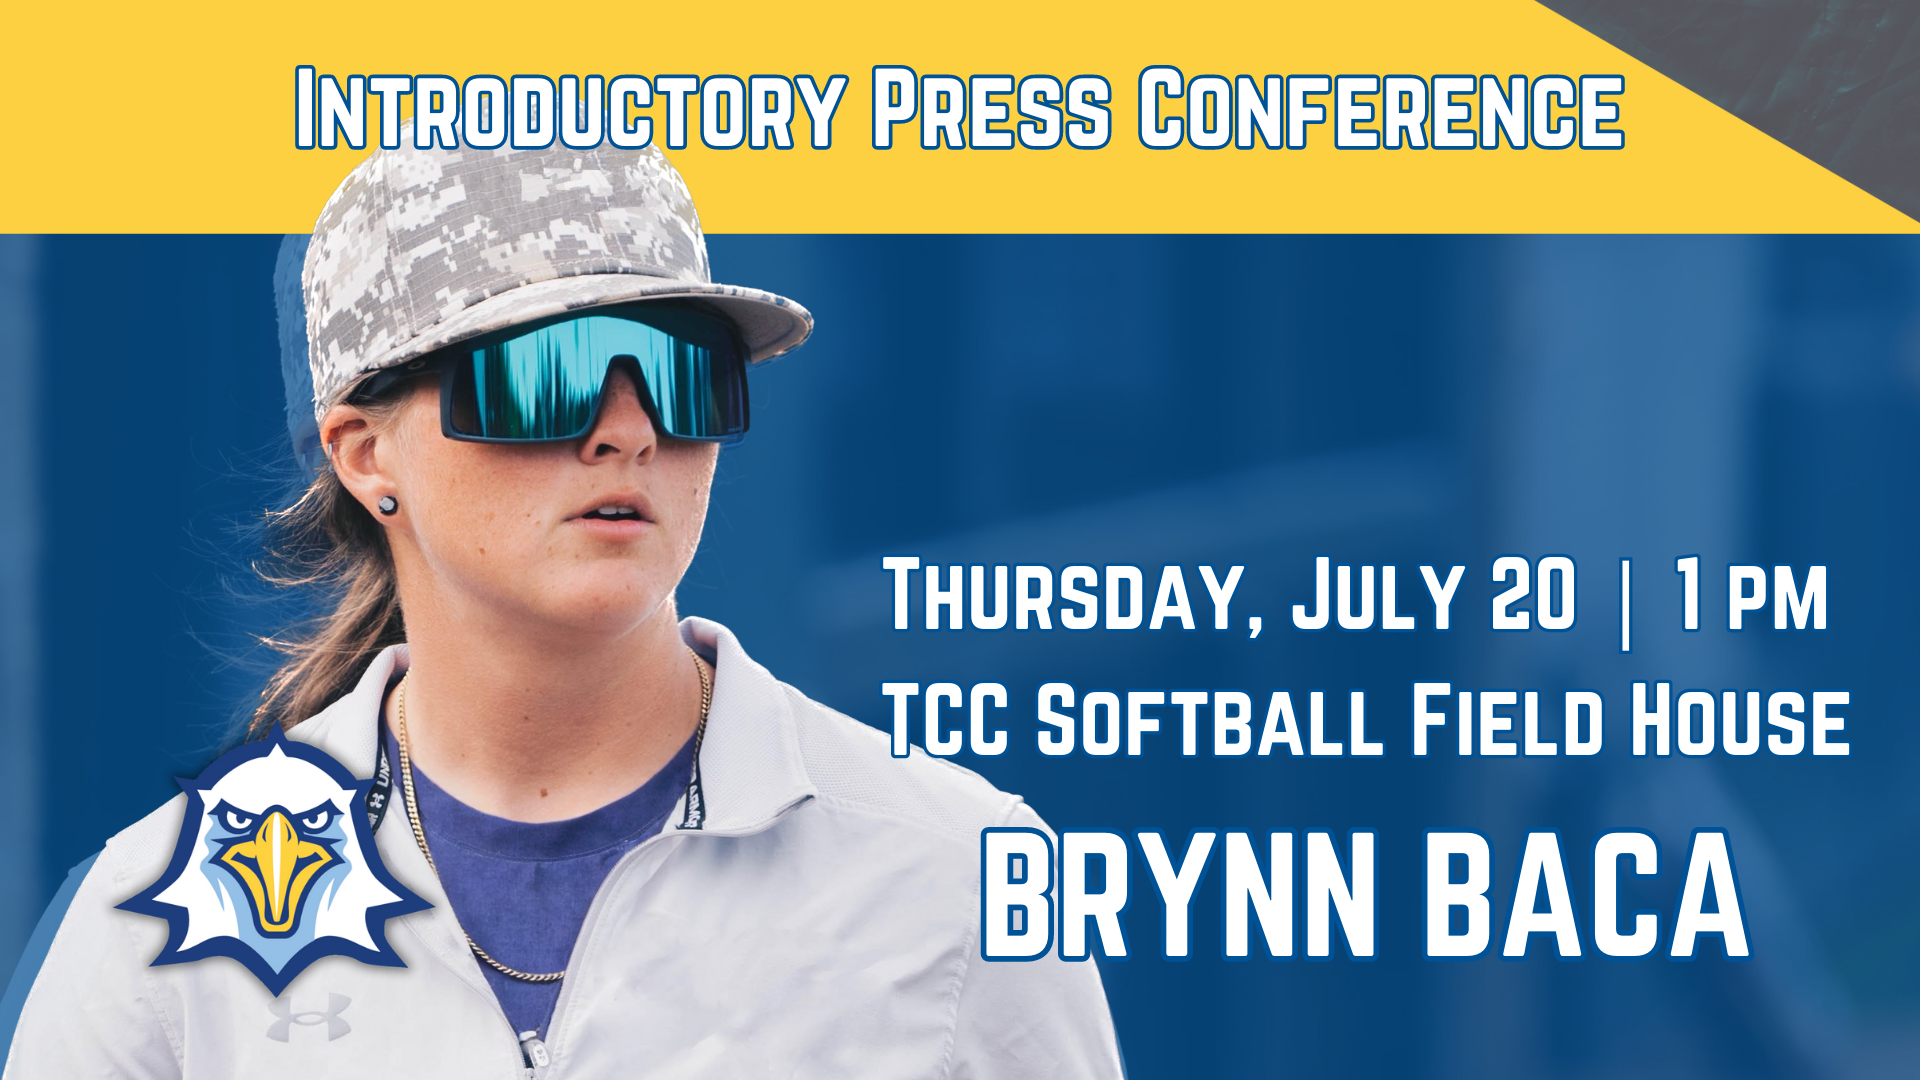 Introductory press conference for Brynn Baca set for Thursday